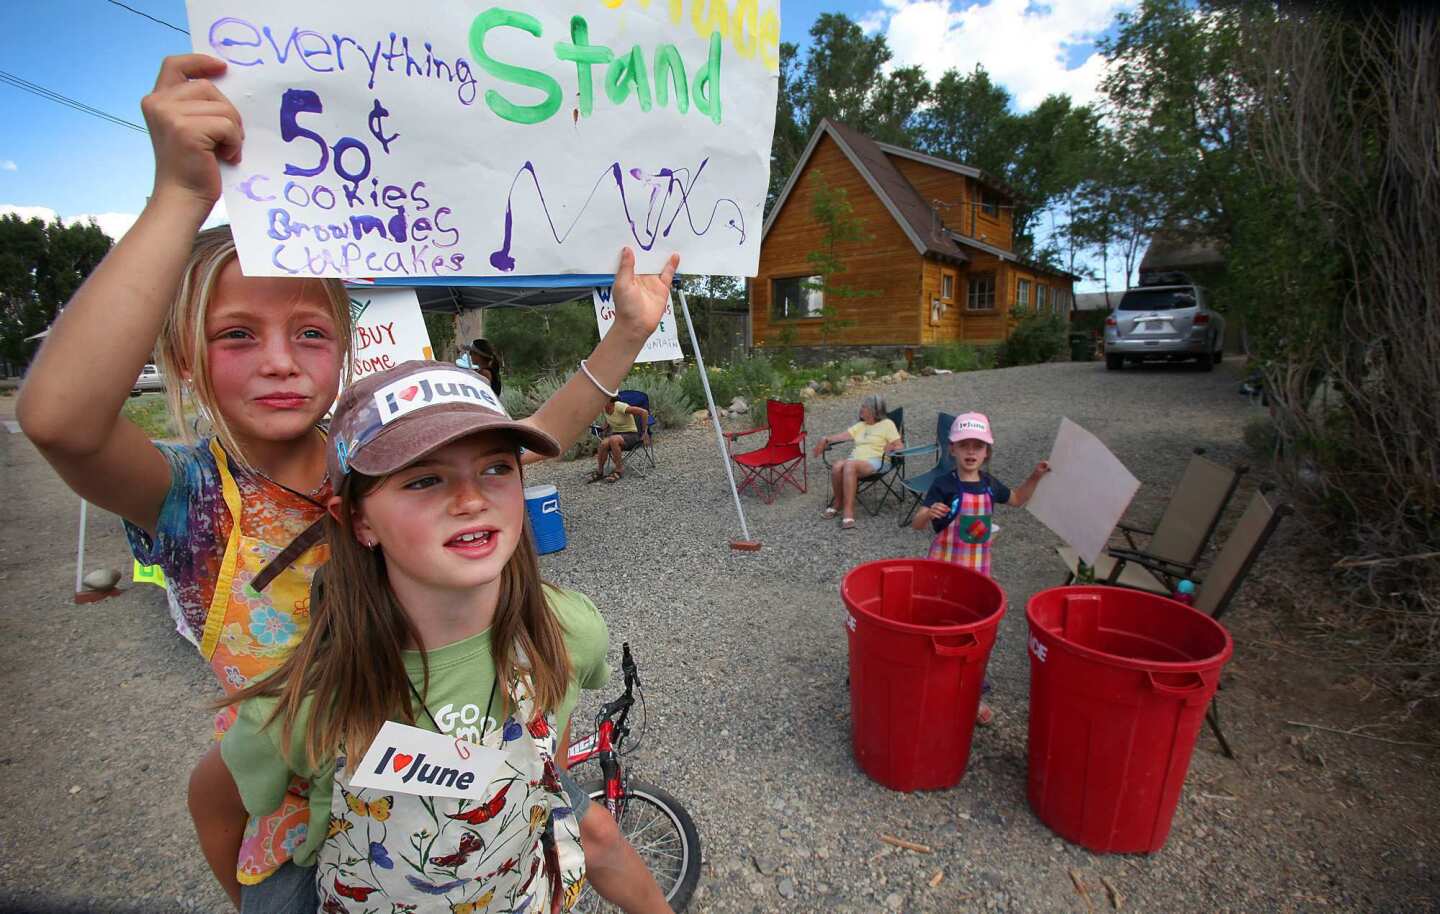 Jordyn Harper, 9, left, holds a sign with Caelen McQuilkin, 10, and Laurel Satterfield, 8, right, as they help sell lemonade and baked goods to raise money and awareness for June Mountain. The Eastern Sierra town of June Lake is predicting hard times now that the operator of Mammoth Mountain has decided to close June Mountain ski resort for at least one year.